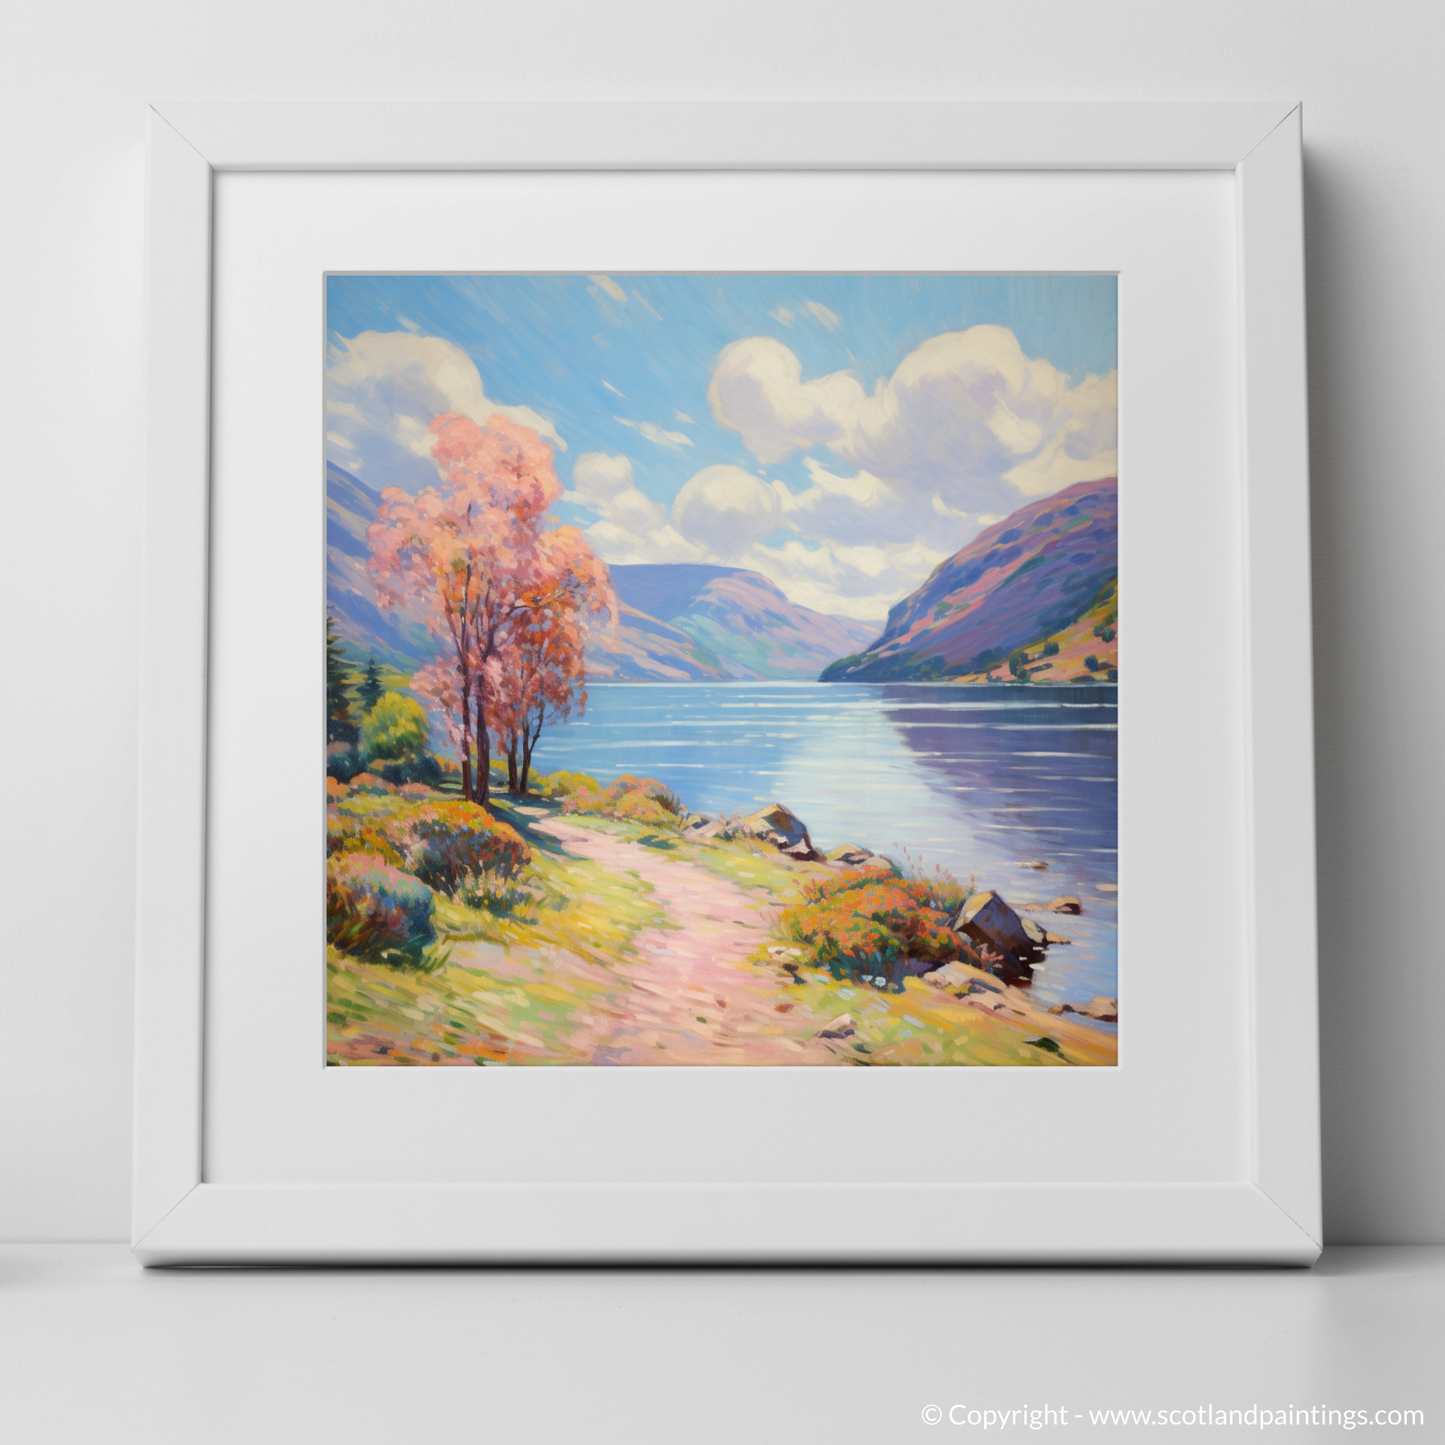 Art Print of Loch Earn, Perth and Kinross in summer with a white frame